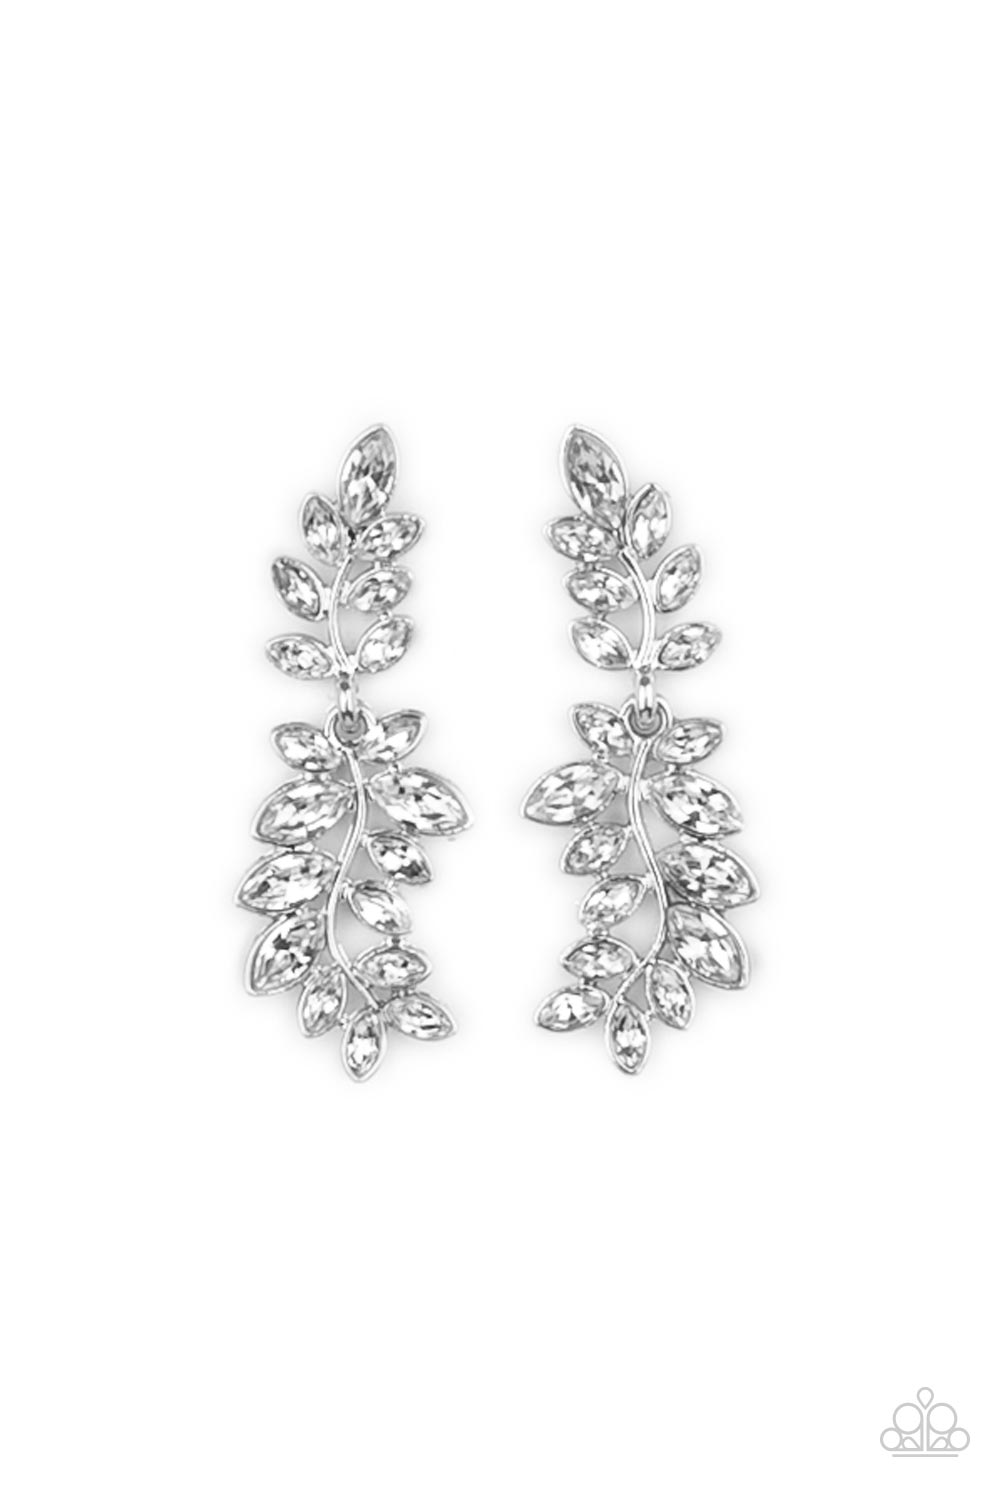 Frond Fairytale White Rhinestone Leaf Earrings - Paparazzi Accessories - lightbox -CarasShop.com - $5 Jewelry by Cara Jewels